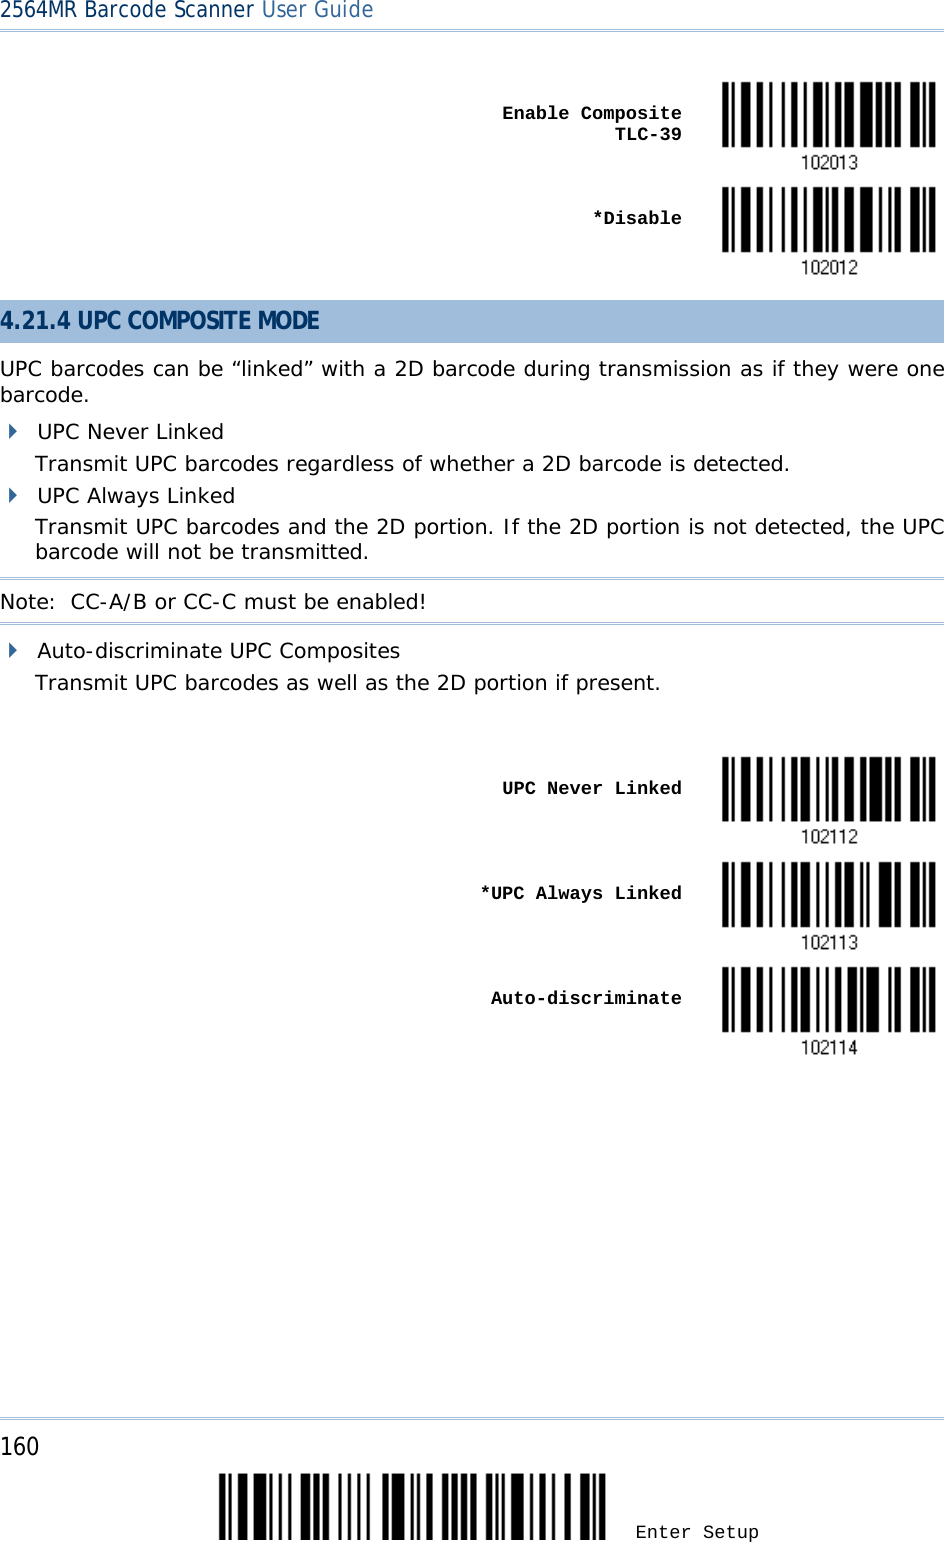 2564MR Barcode Scanner User Guide     Enable Composite TLC-39     *Disable  4.21.4 UPC COMPOSITE MODE UPC barcodes can be “linked” with a 2D barcode during transmission as if they were one barcode.  UPC Never Linked Transmit UPC barcodes regardless of whether a 2D barcode is detected.  UPC Always Linked Transmit UPC barcodes and the 2D portion. If the 2D portion is not detected, the UPC barcode will not be transmitted. Note: CC-A/B or CC-C must be enabled!  Auto-discriminate UPC Composites Transmit UPC barcodes as well as the 2D portion if present.     UPC Never Linked     *UPC Always Linked     Auto-discriminate  160 Enter Setup 